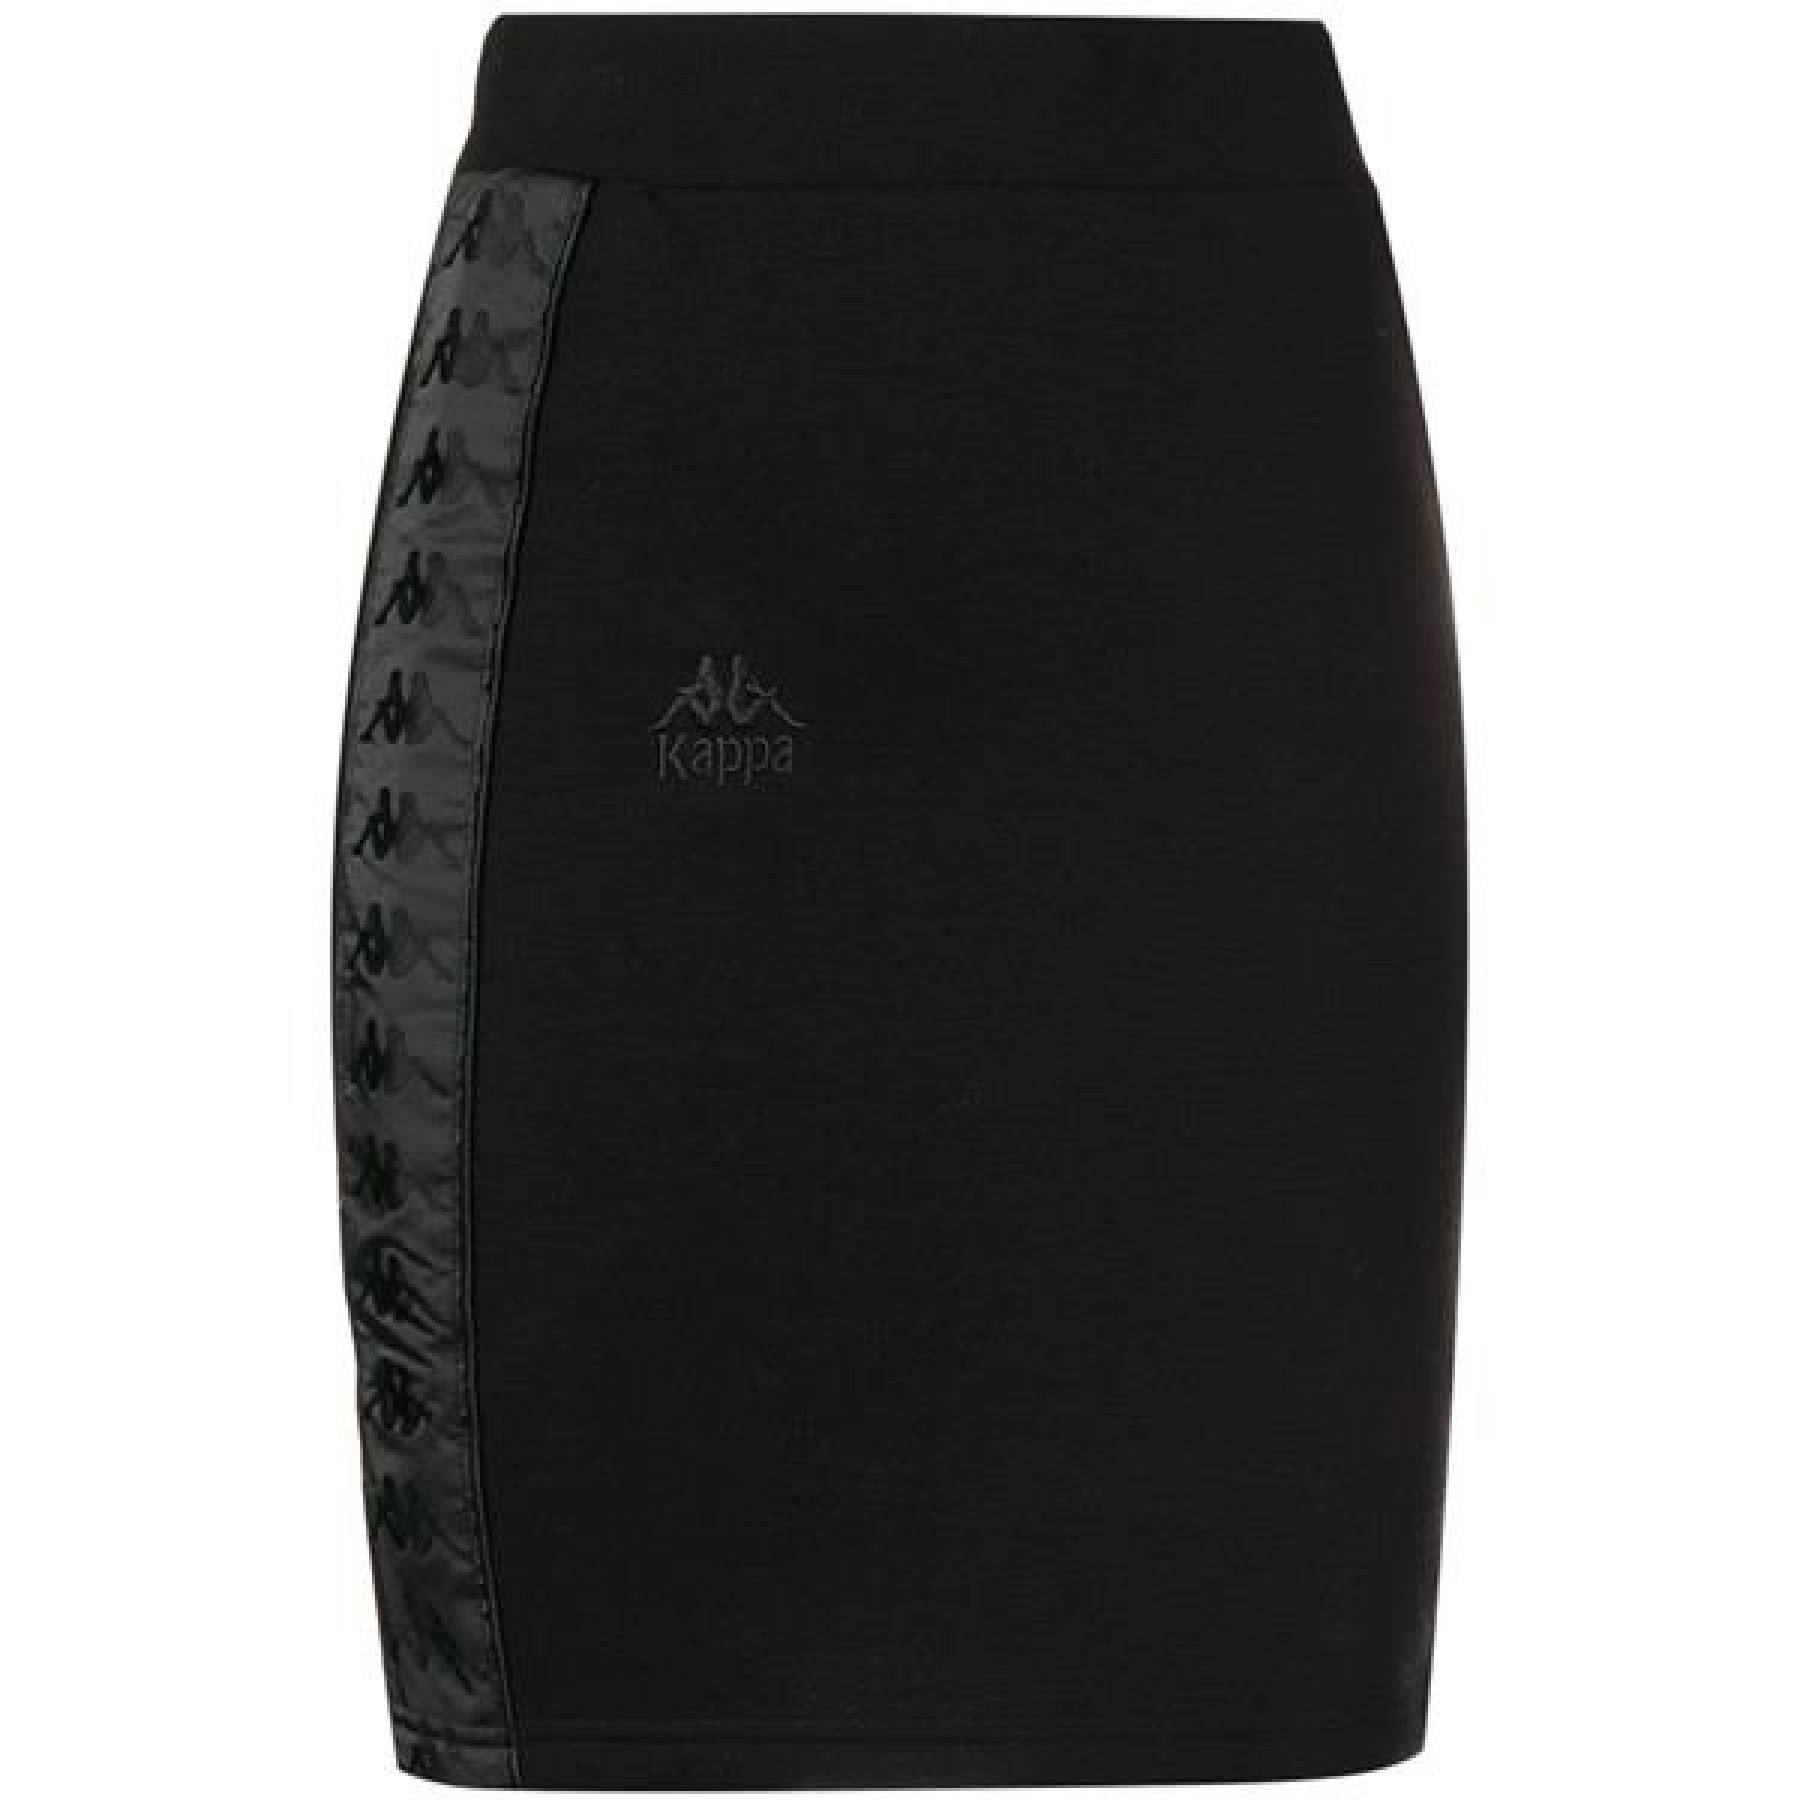 Skirt Kappa authentic Aval